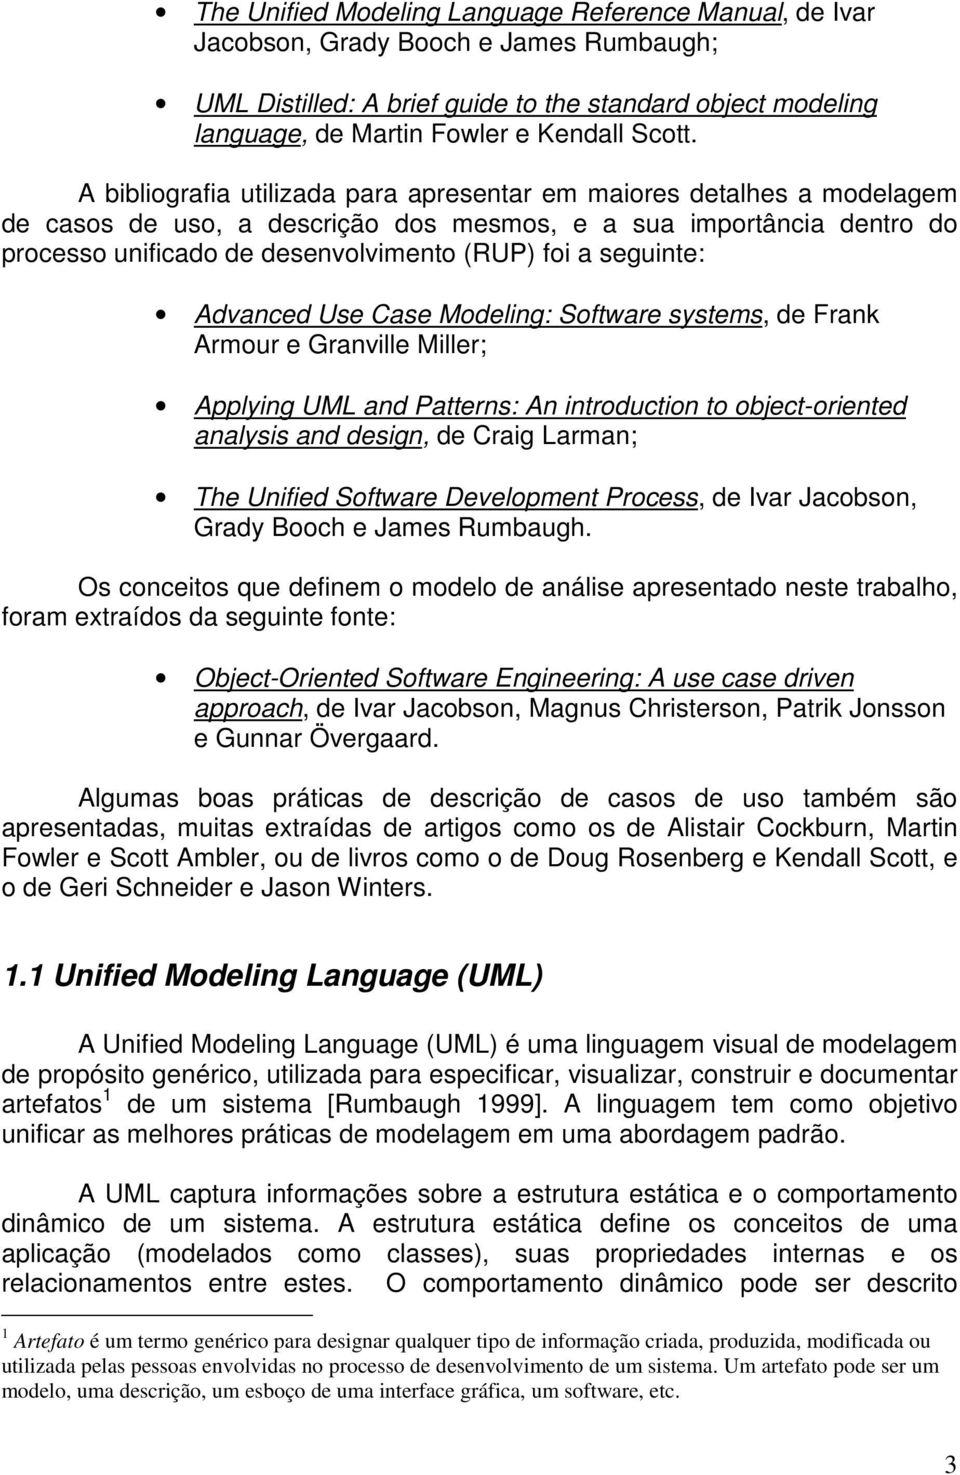 seguinte: Advanced Use Case Modeling: Software systems, de Frank Armour e Granville Miller; Applying UML and Patterns: An introduction to object-oriented analysis and design, de Craig Larman; The